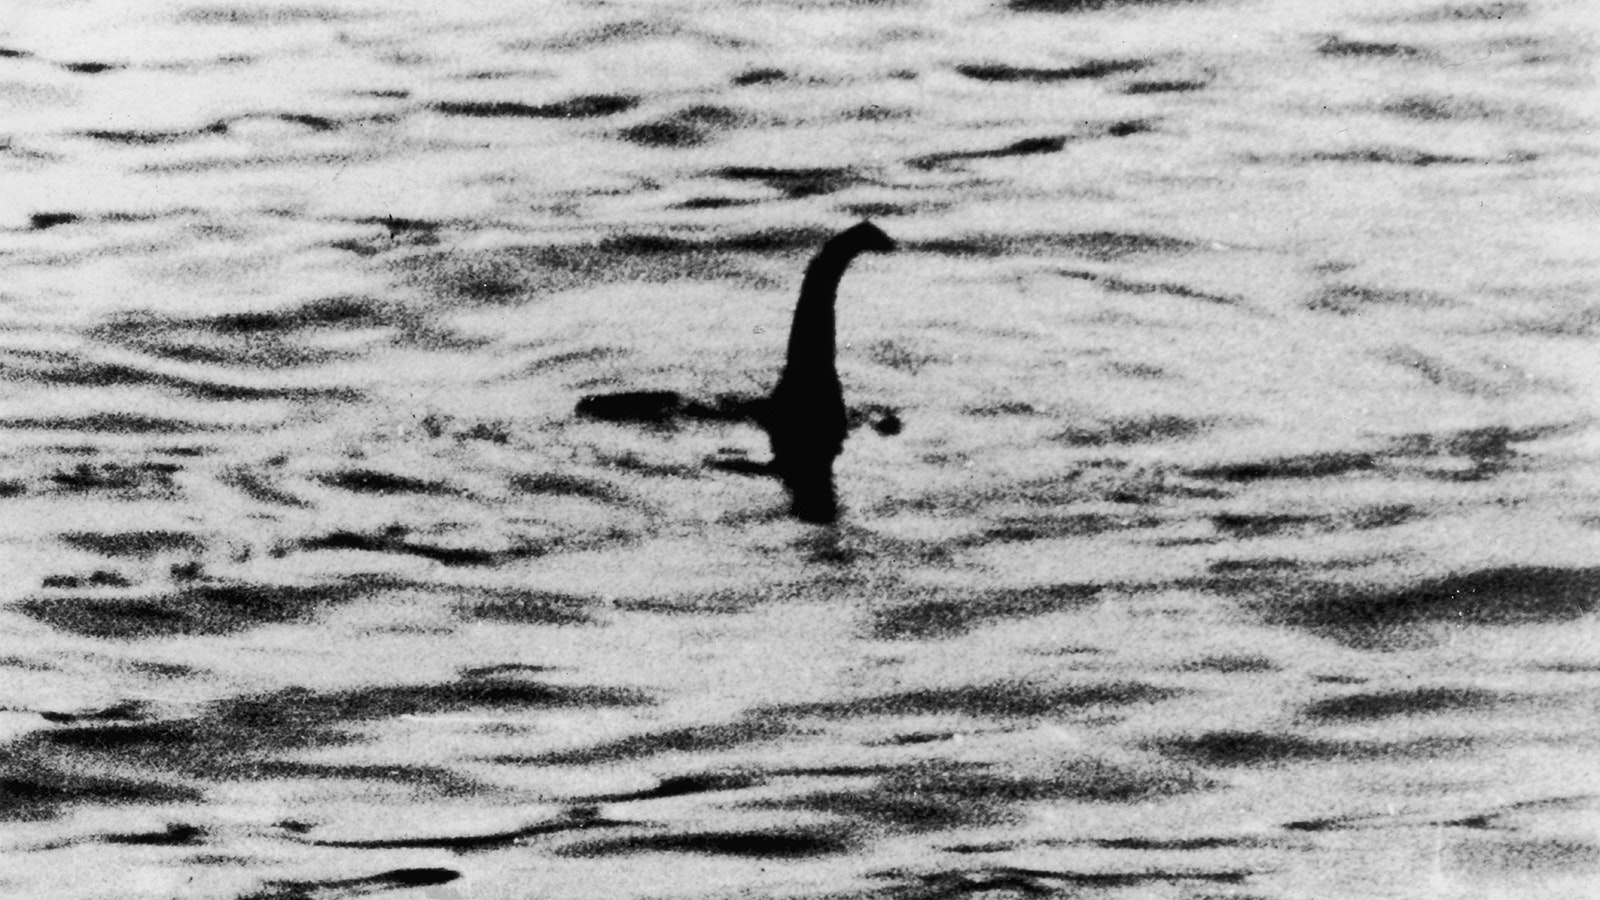 A view of the Loch Ness Monster near Inverness, Scotland, on April 19, 1934. The photograph, one of two pictures known as the "surgeon's photographs," was allegedly taken by Col. Robert Kenneth Wilson, though it was later exposed as a hoax by one of the participants, Chris Spurling, who, on his deathbed revealed that the pictures were staged.